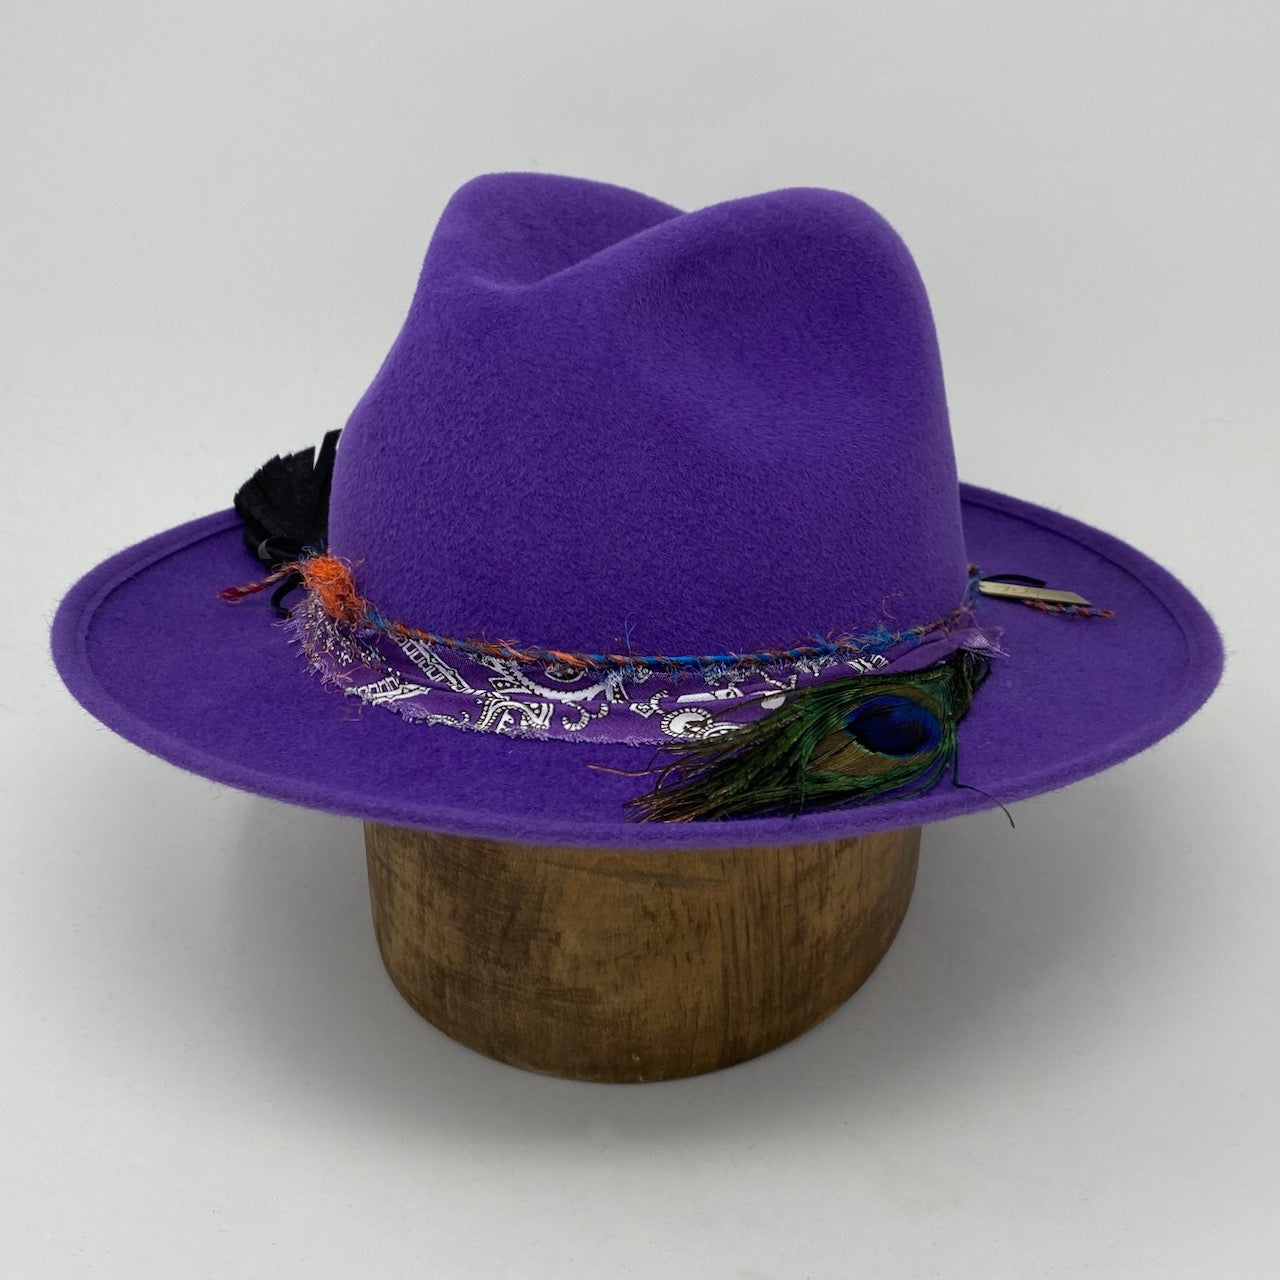 "Vibrant Electric" - The Gord Downie 'Away Is Mine' Collection